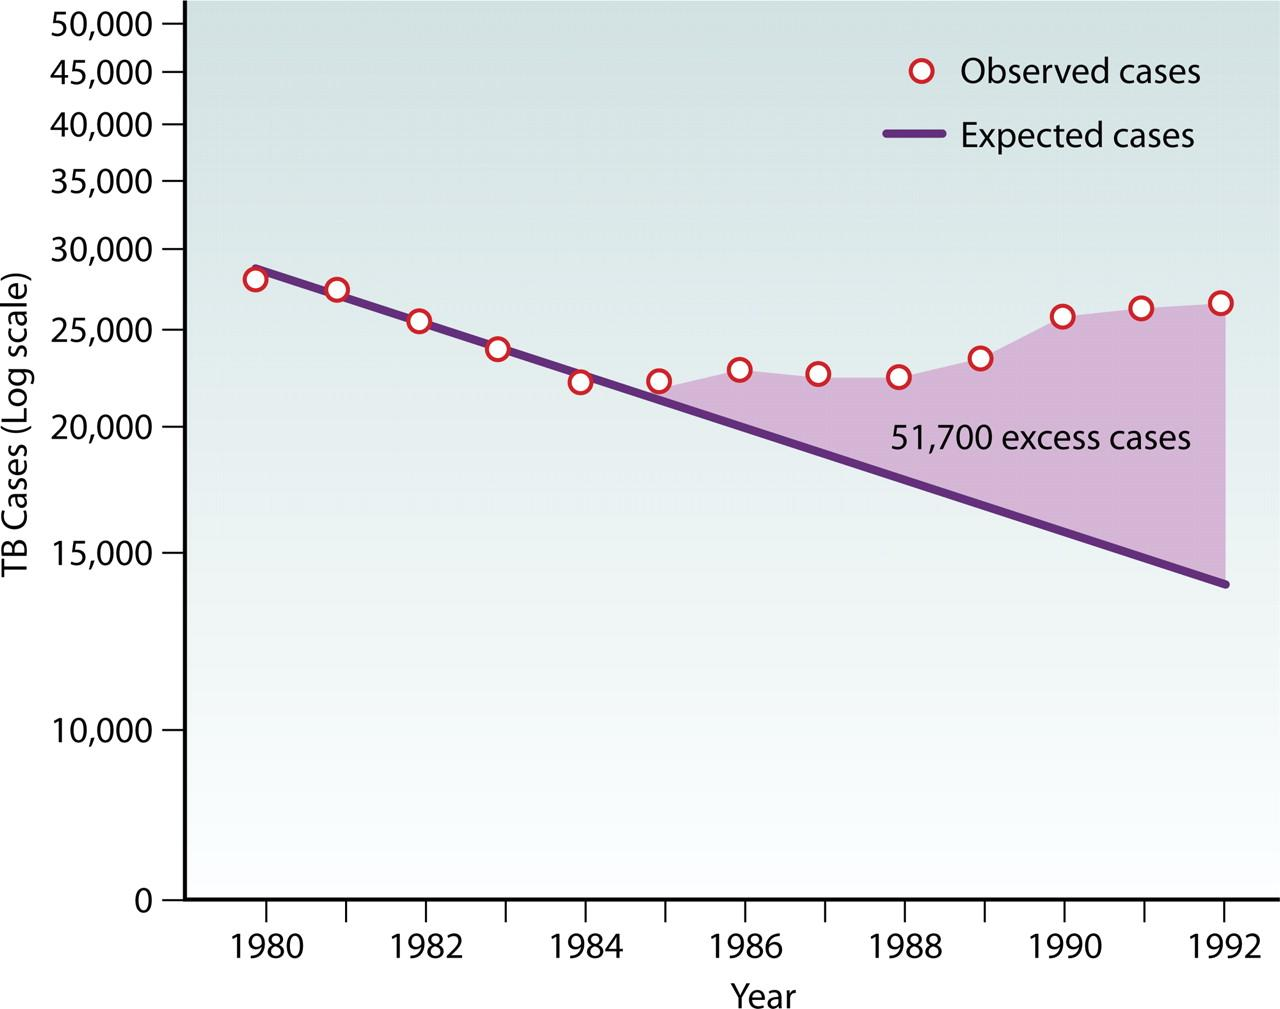 Estimated excess TB cases attributed to the worsening HIV epidemic in the United